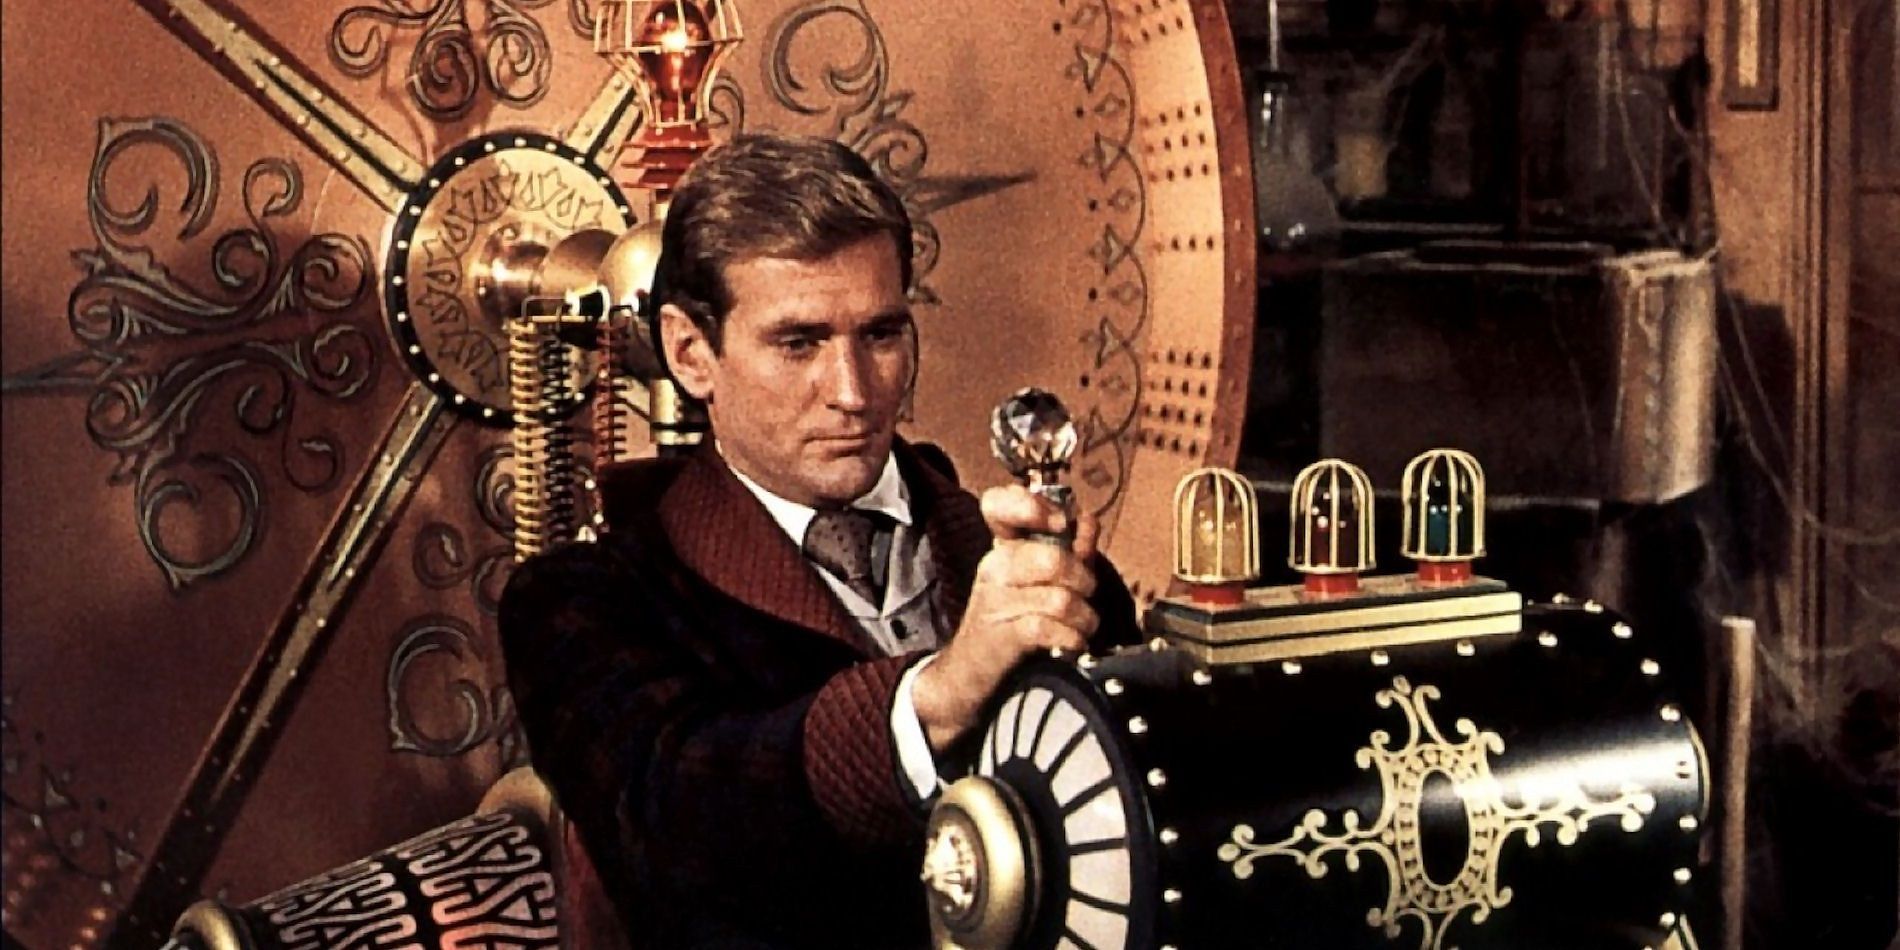 Rod Taylor operating the machine in The Time Machine (1960)